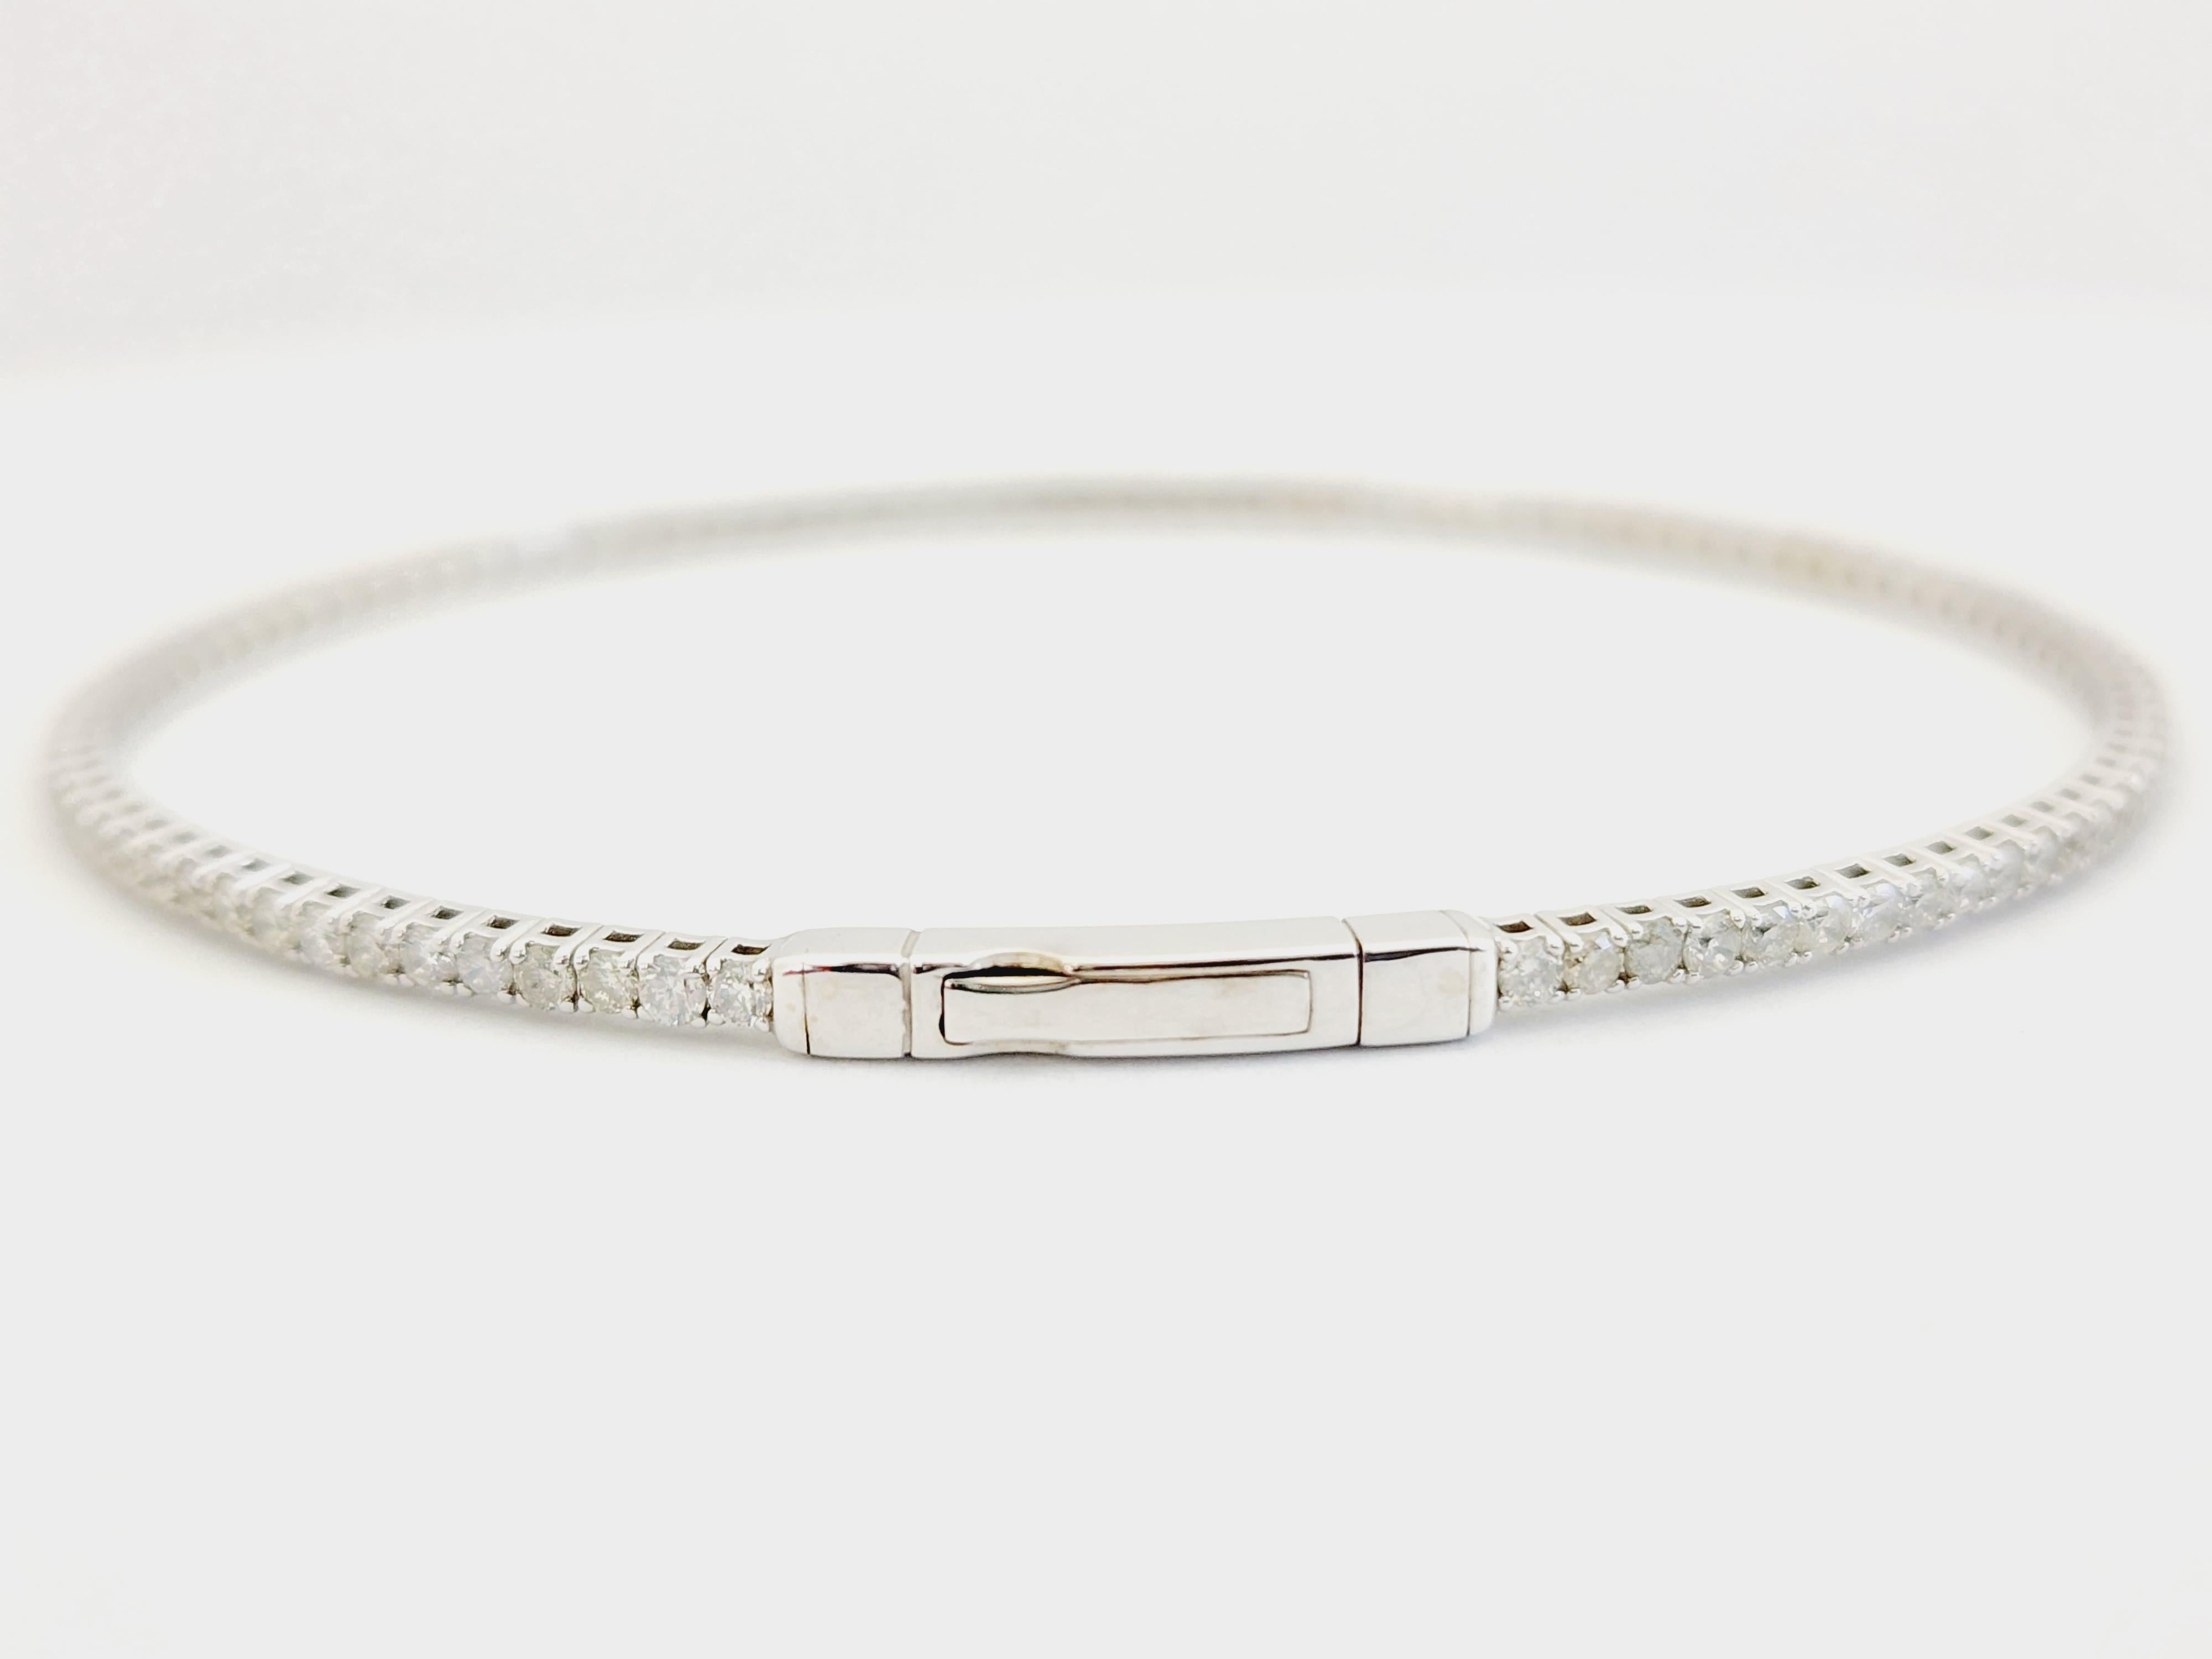 Natural Diamonds 1.75 ctw flexible full bangle white gold 14k 7 Inch. Average Color I Clarity SI, 1.7 mm wide.